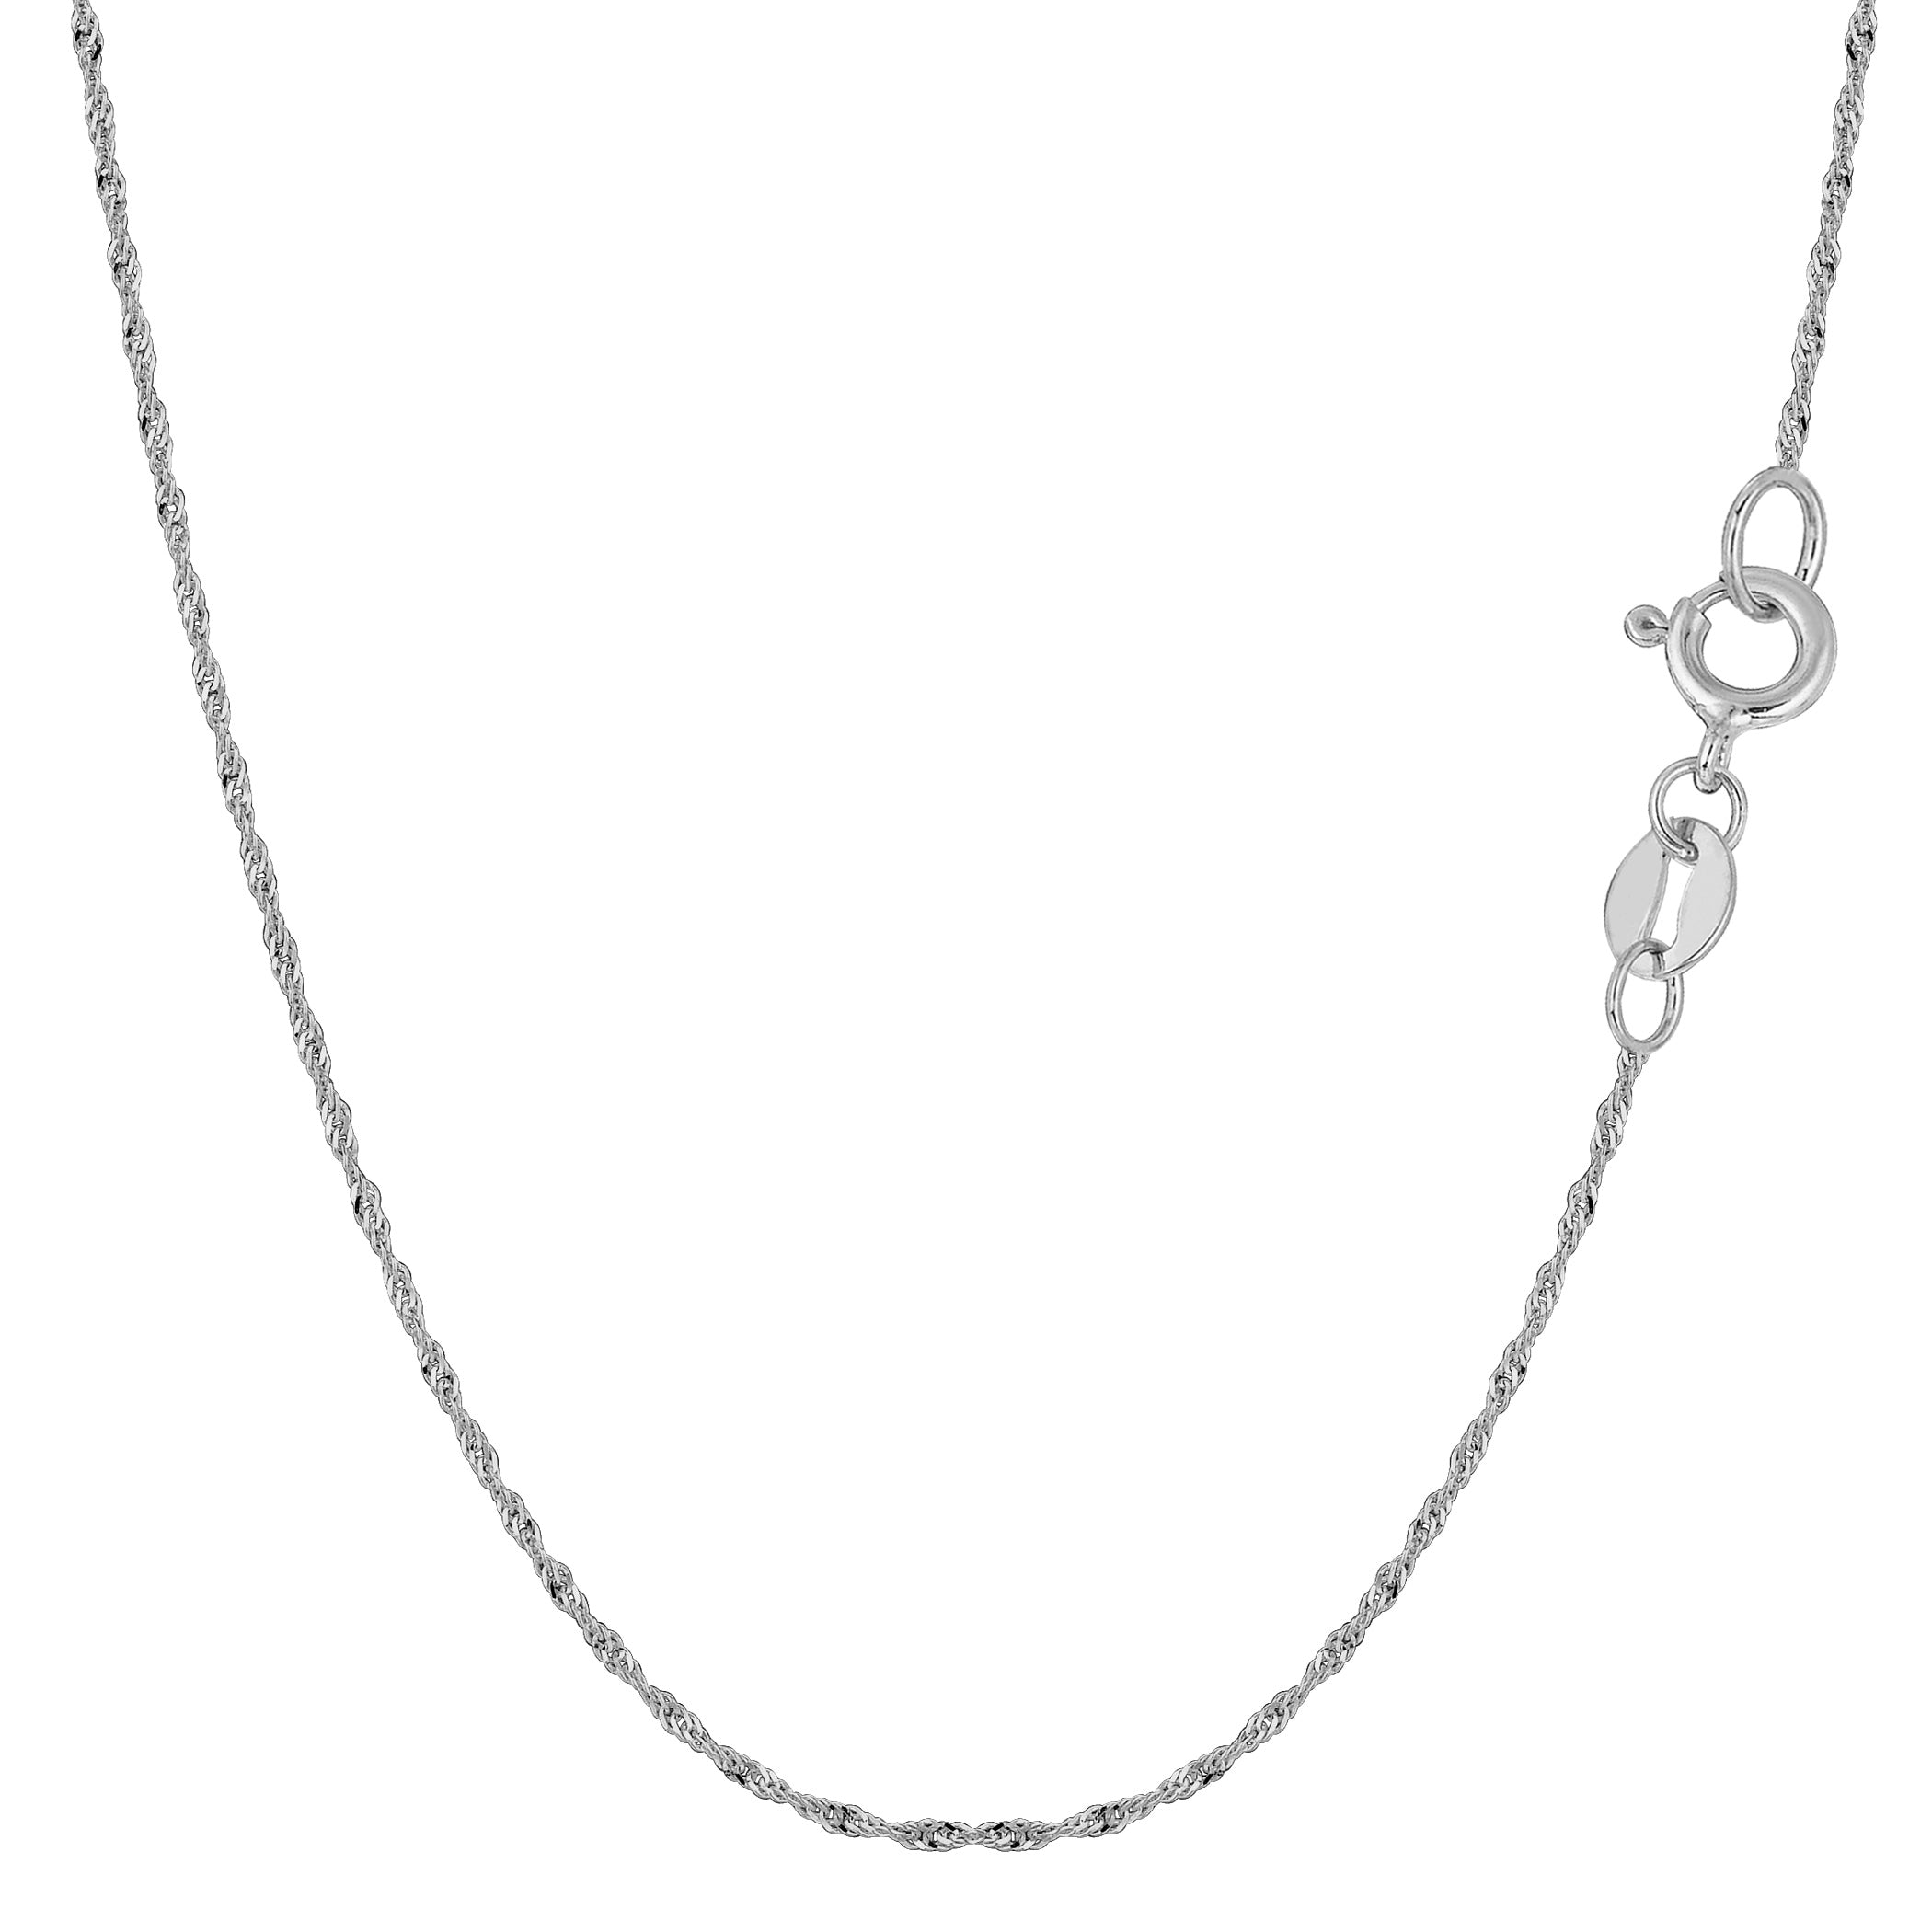 14k White Gold Singapore Chain Necklace, 1.0mm fine designer jewelry for men and women